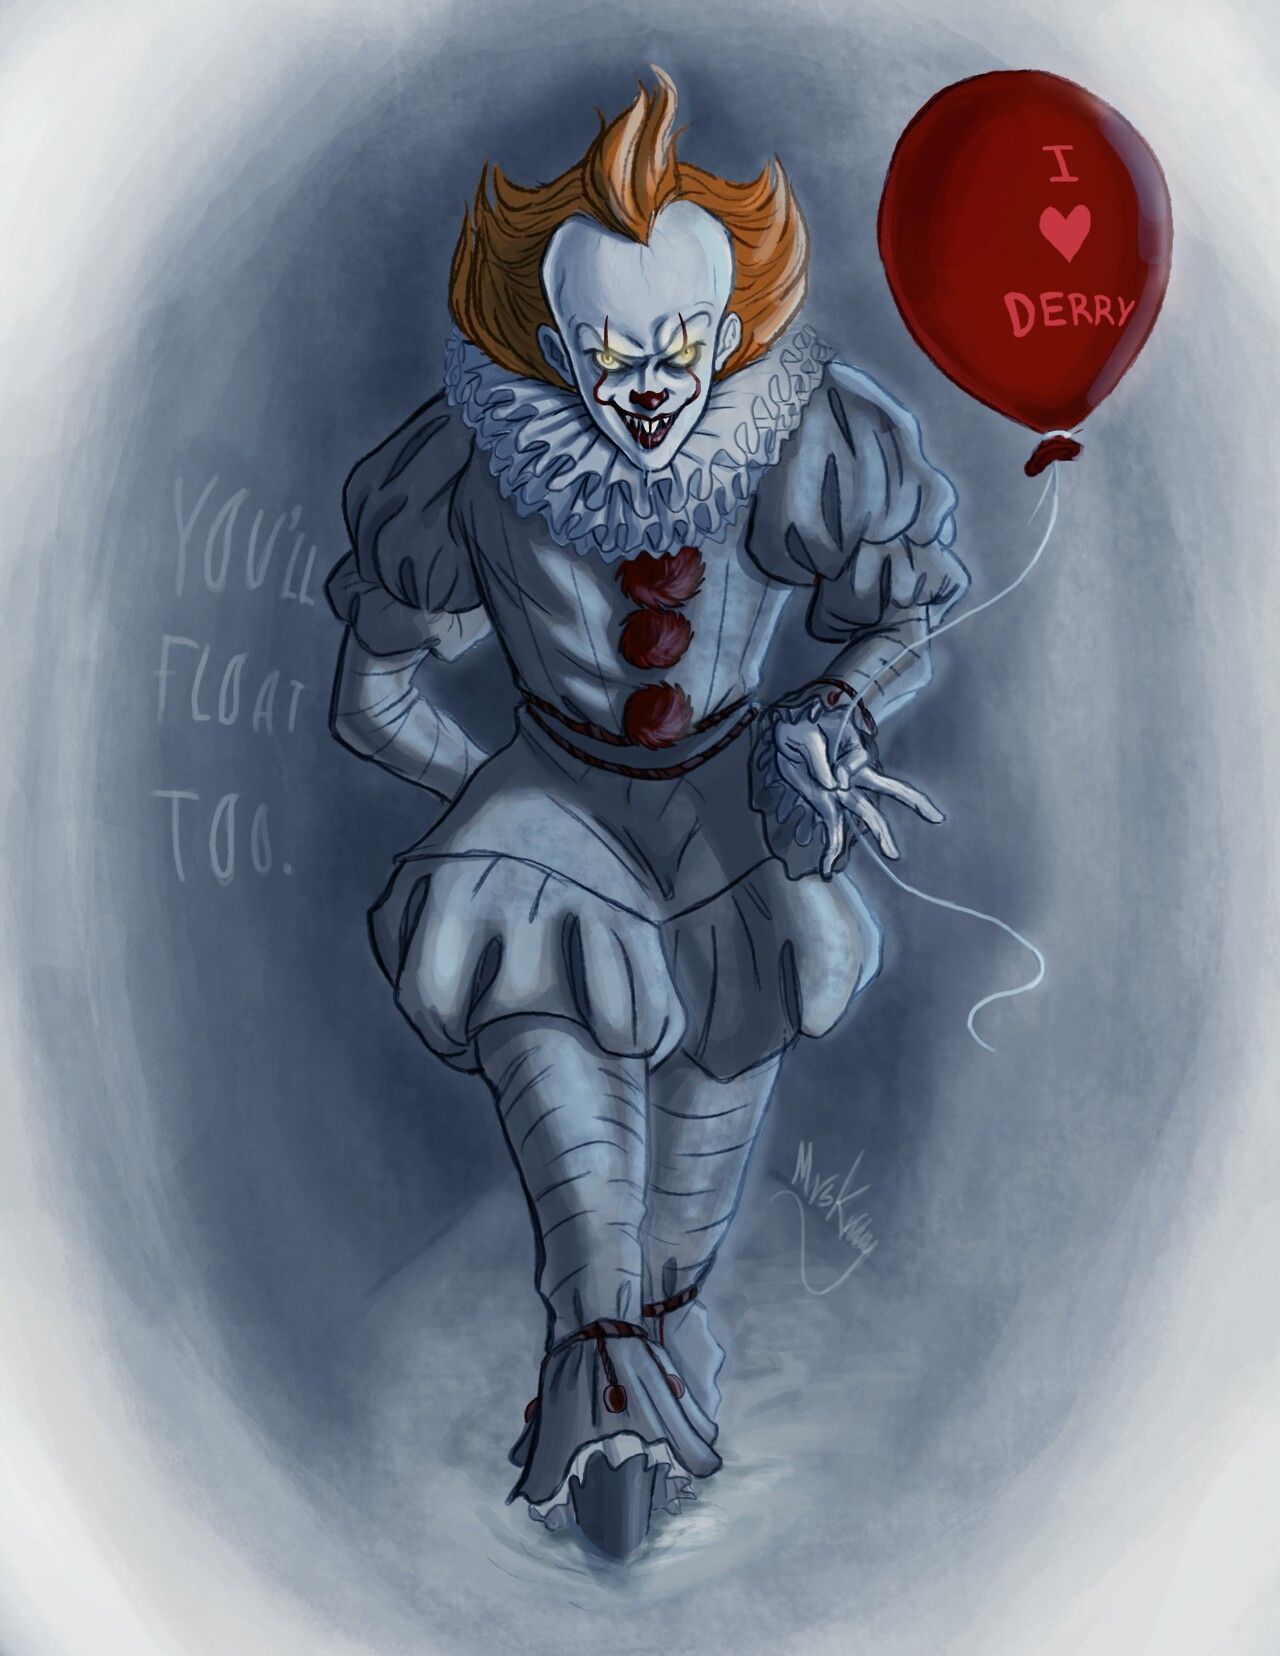 COME AND FLOAT LIKE A BALLOON !!!!!!!. Pennywise the clown, Pennywise, Pennywise the dancing clown